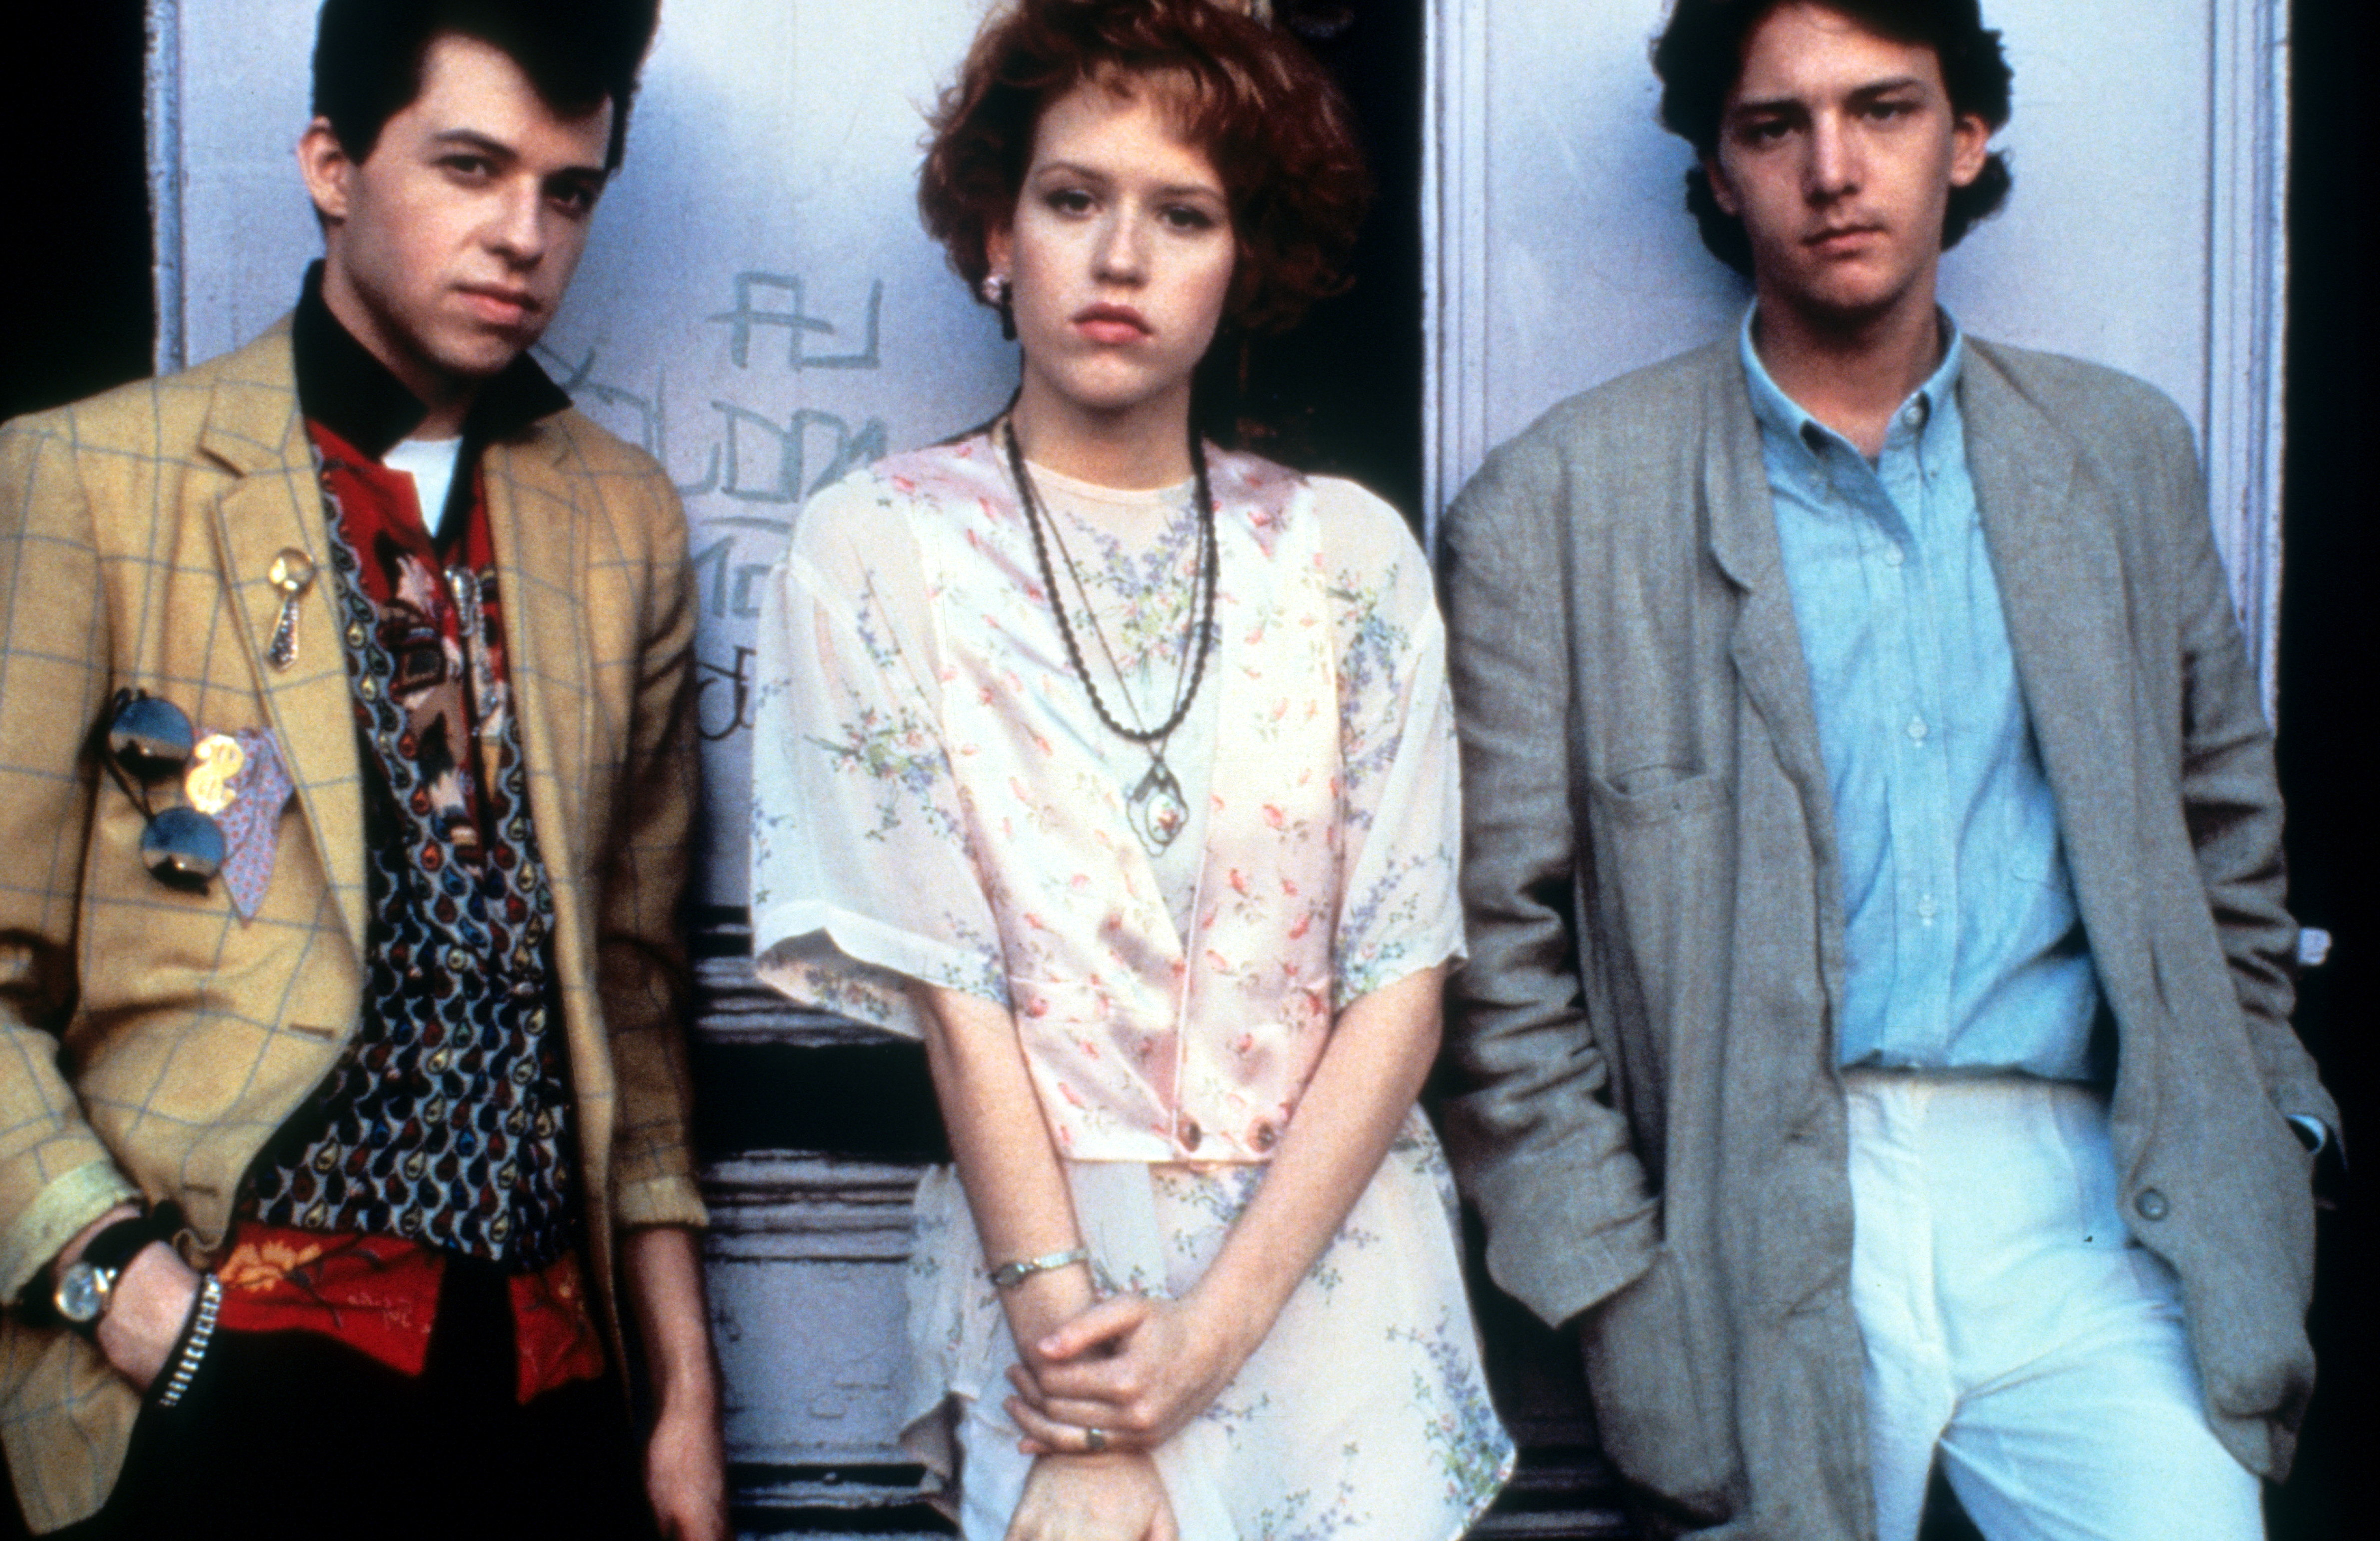 Jon Cryer, Molly Ringwald, and Andrew McCarthy on the set of "Pretty In Pink" in 1986 | Source: Getty Images